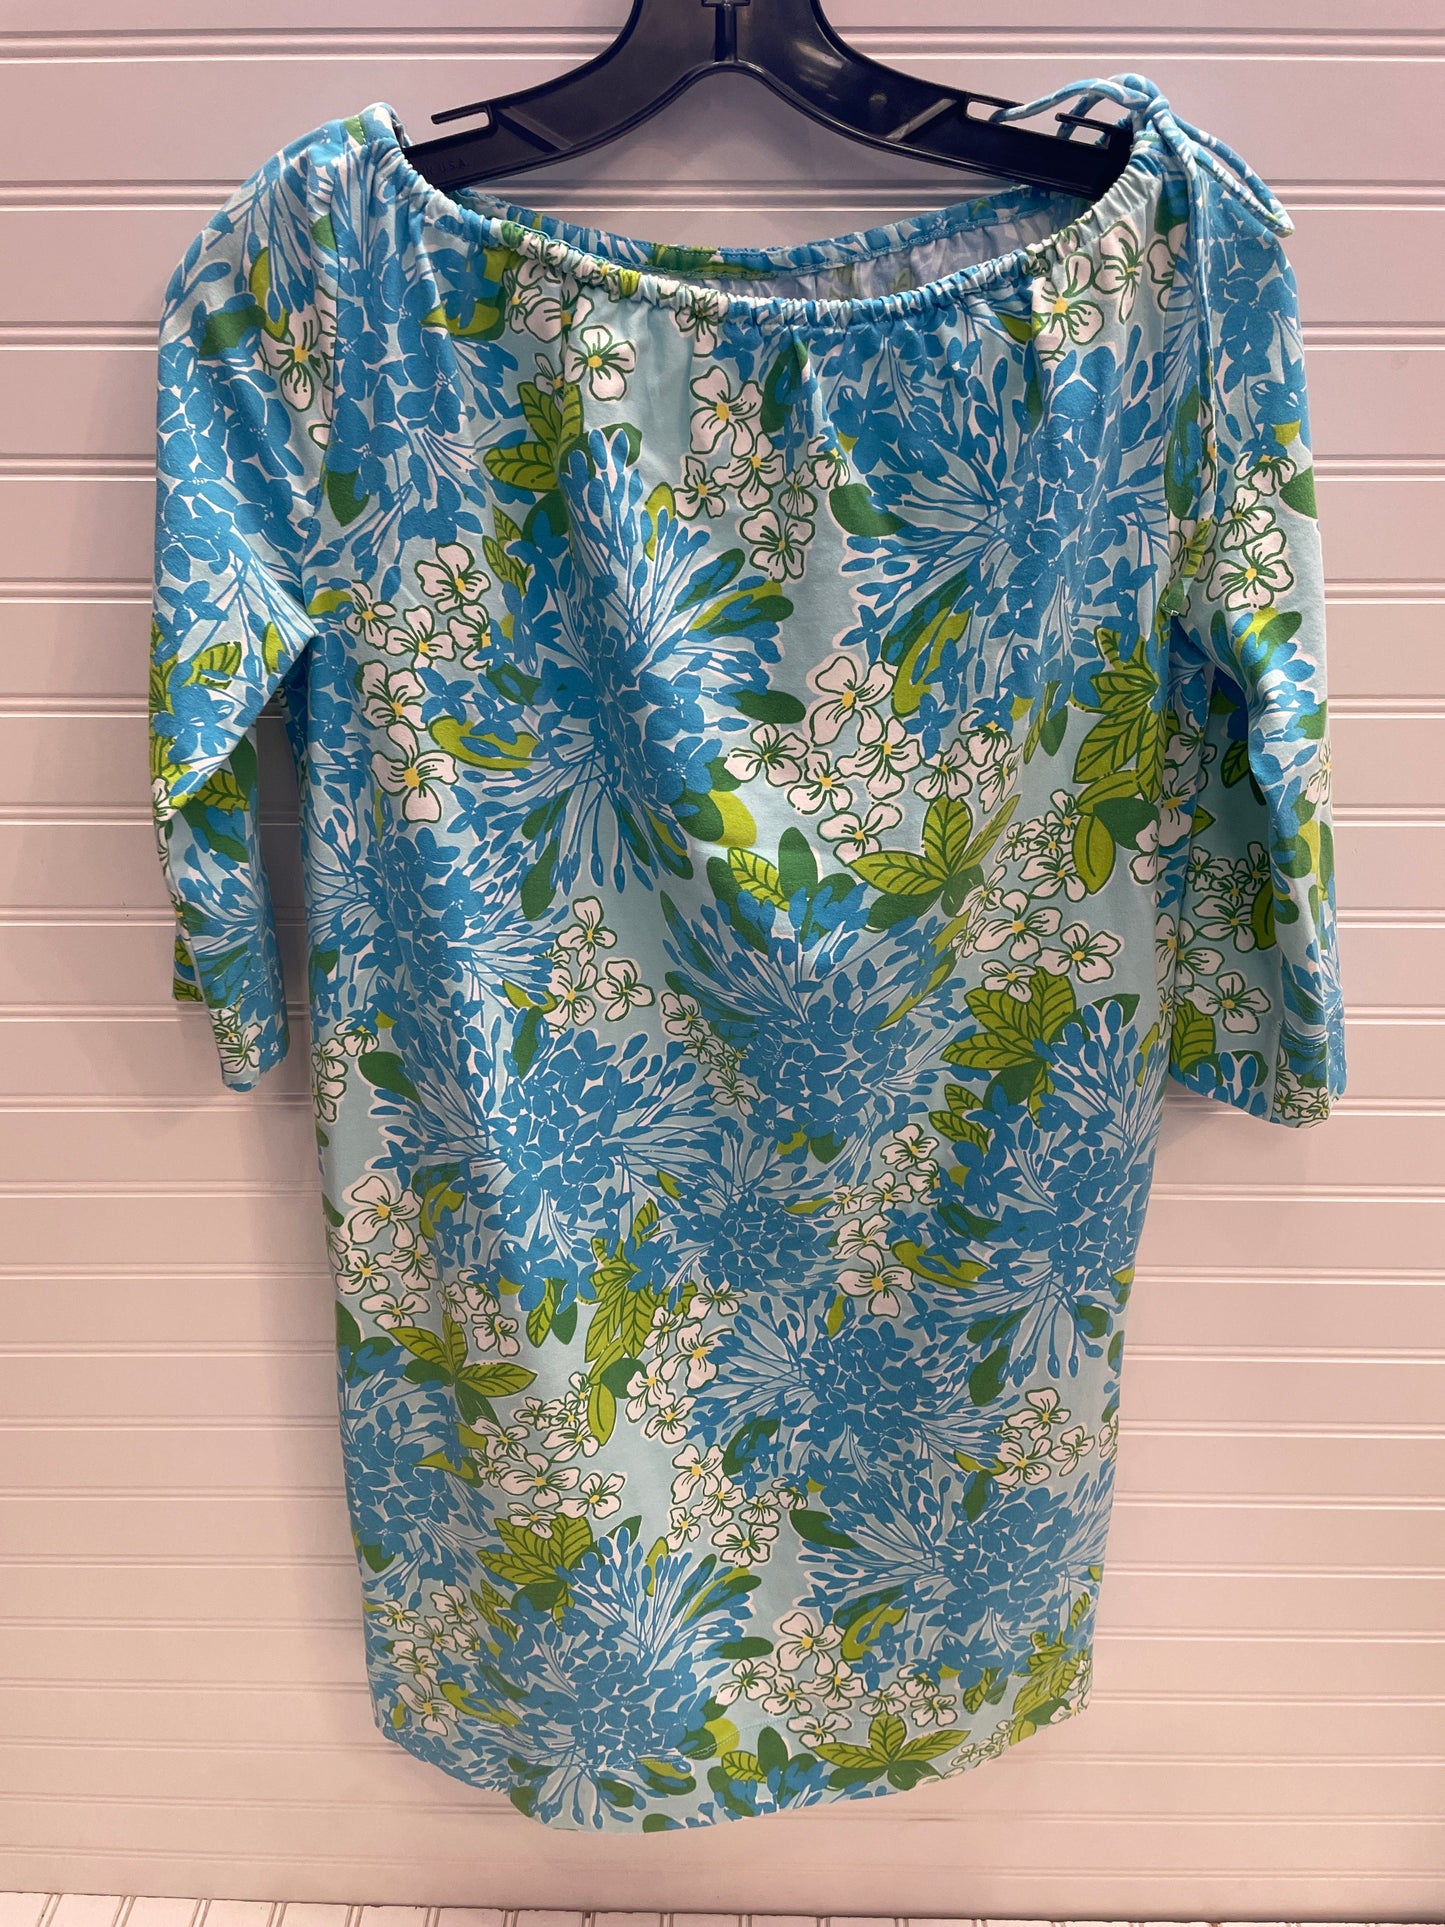 Multi-colored Dress Designer Lilly Pulitzer, Size Xs